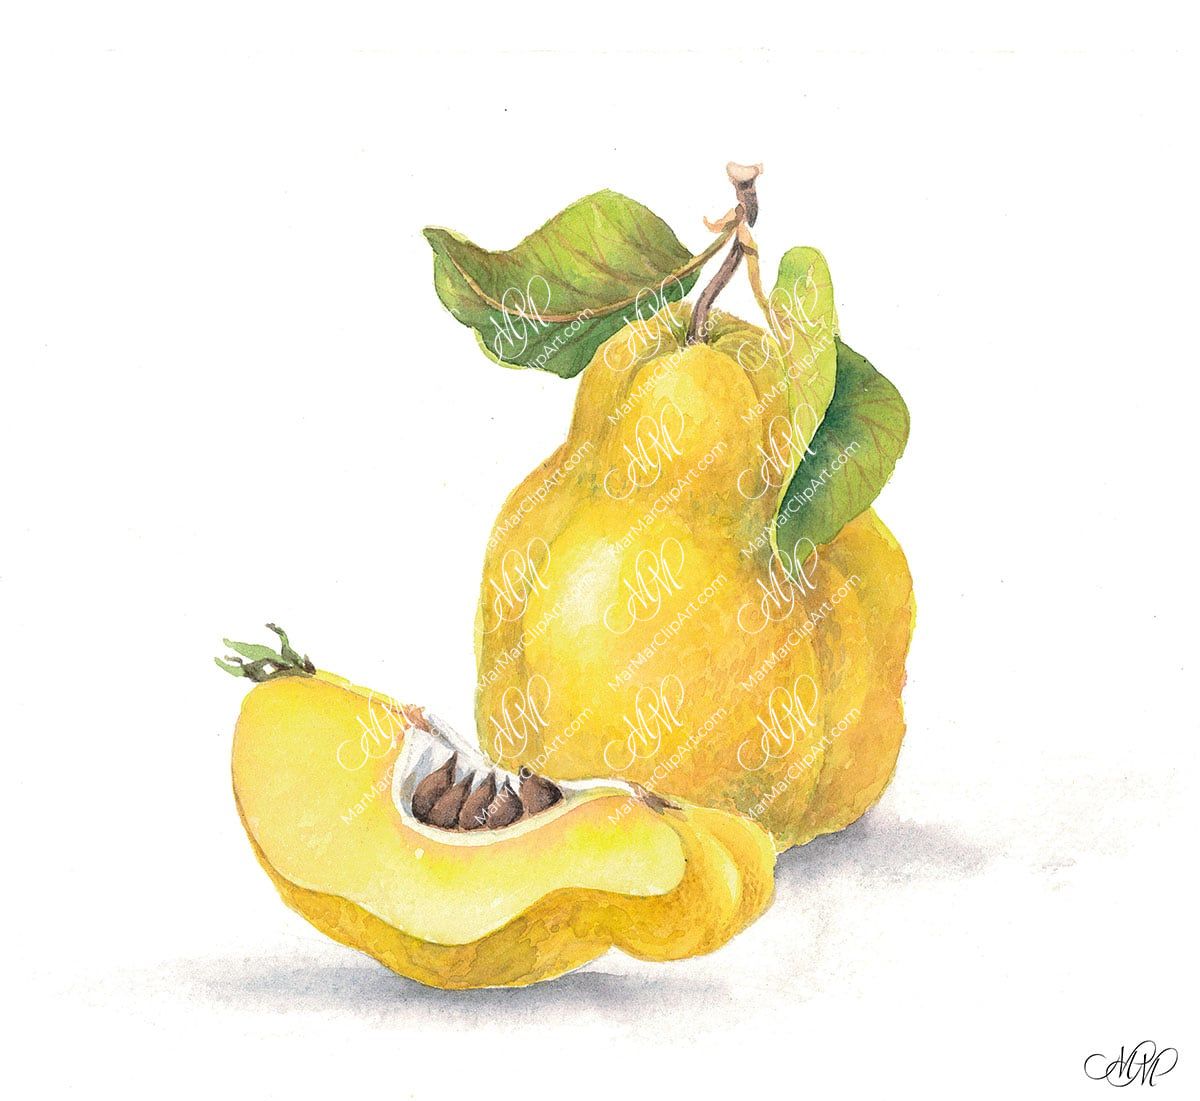 Quince. Isolated on white background with work path. Watercolor. 40x37 cm. cottone.jpg 6,8Mb. RGB. 300 px. Instant download.